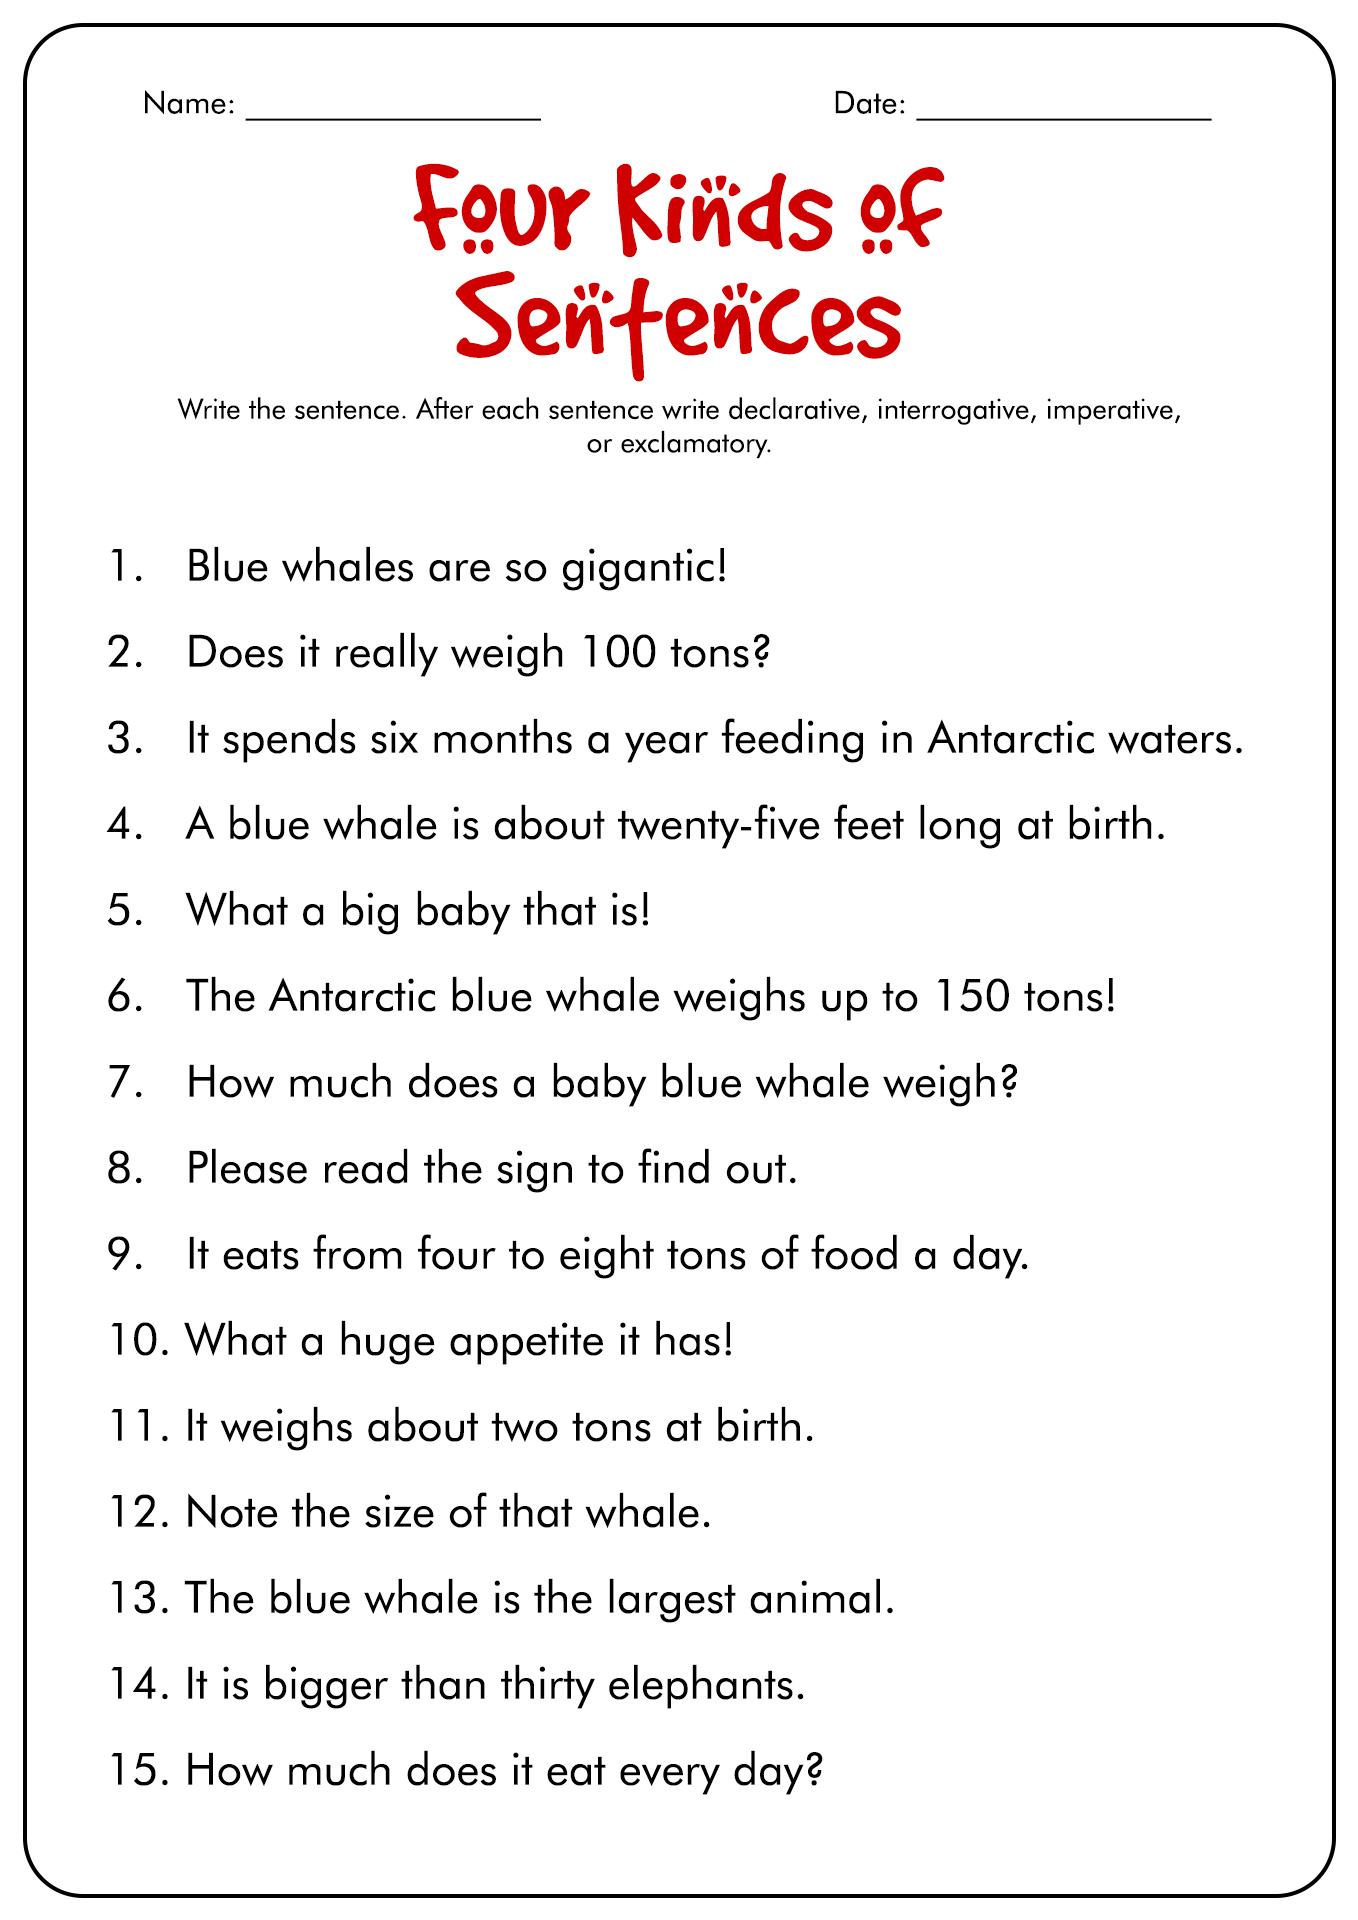 11 Best Images Of Four Types Of Sentences Worksheets Four Sentence Types Worksheets Correct